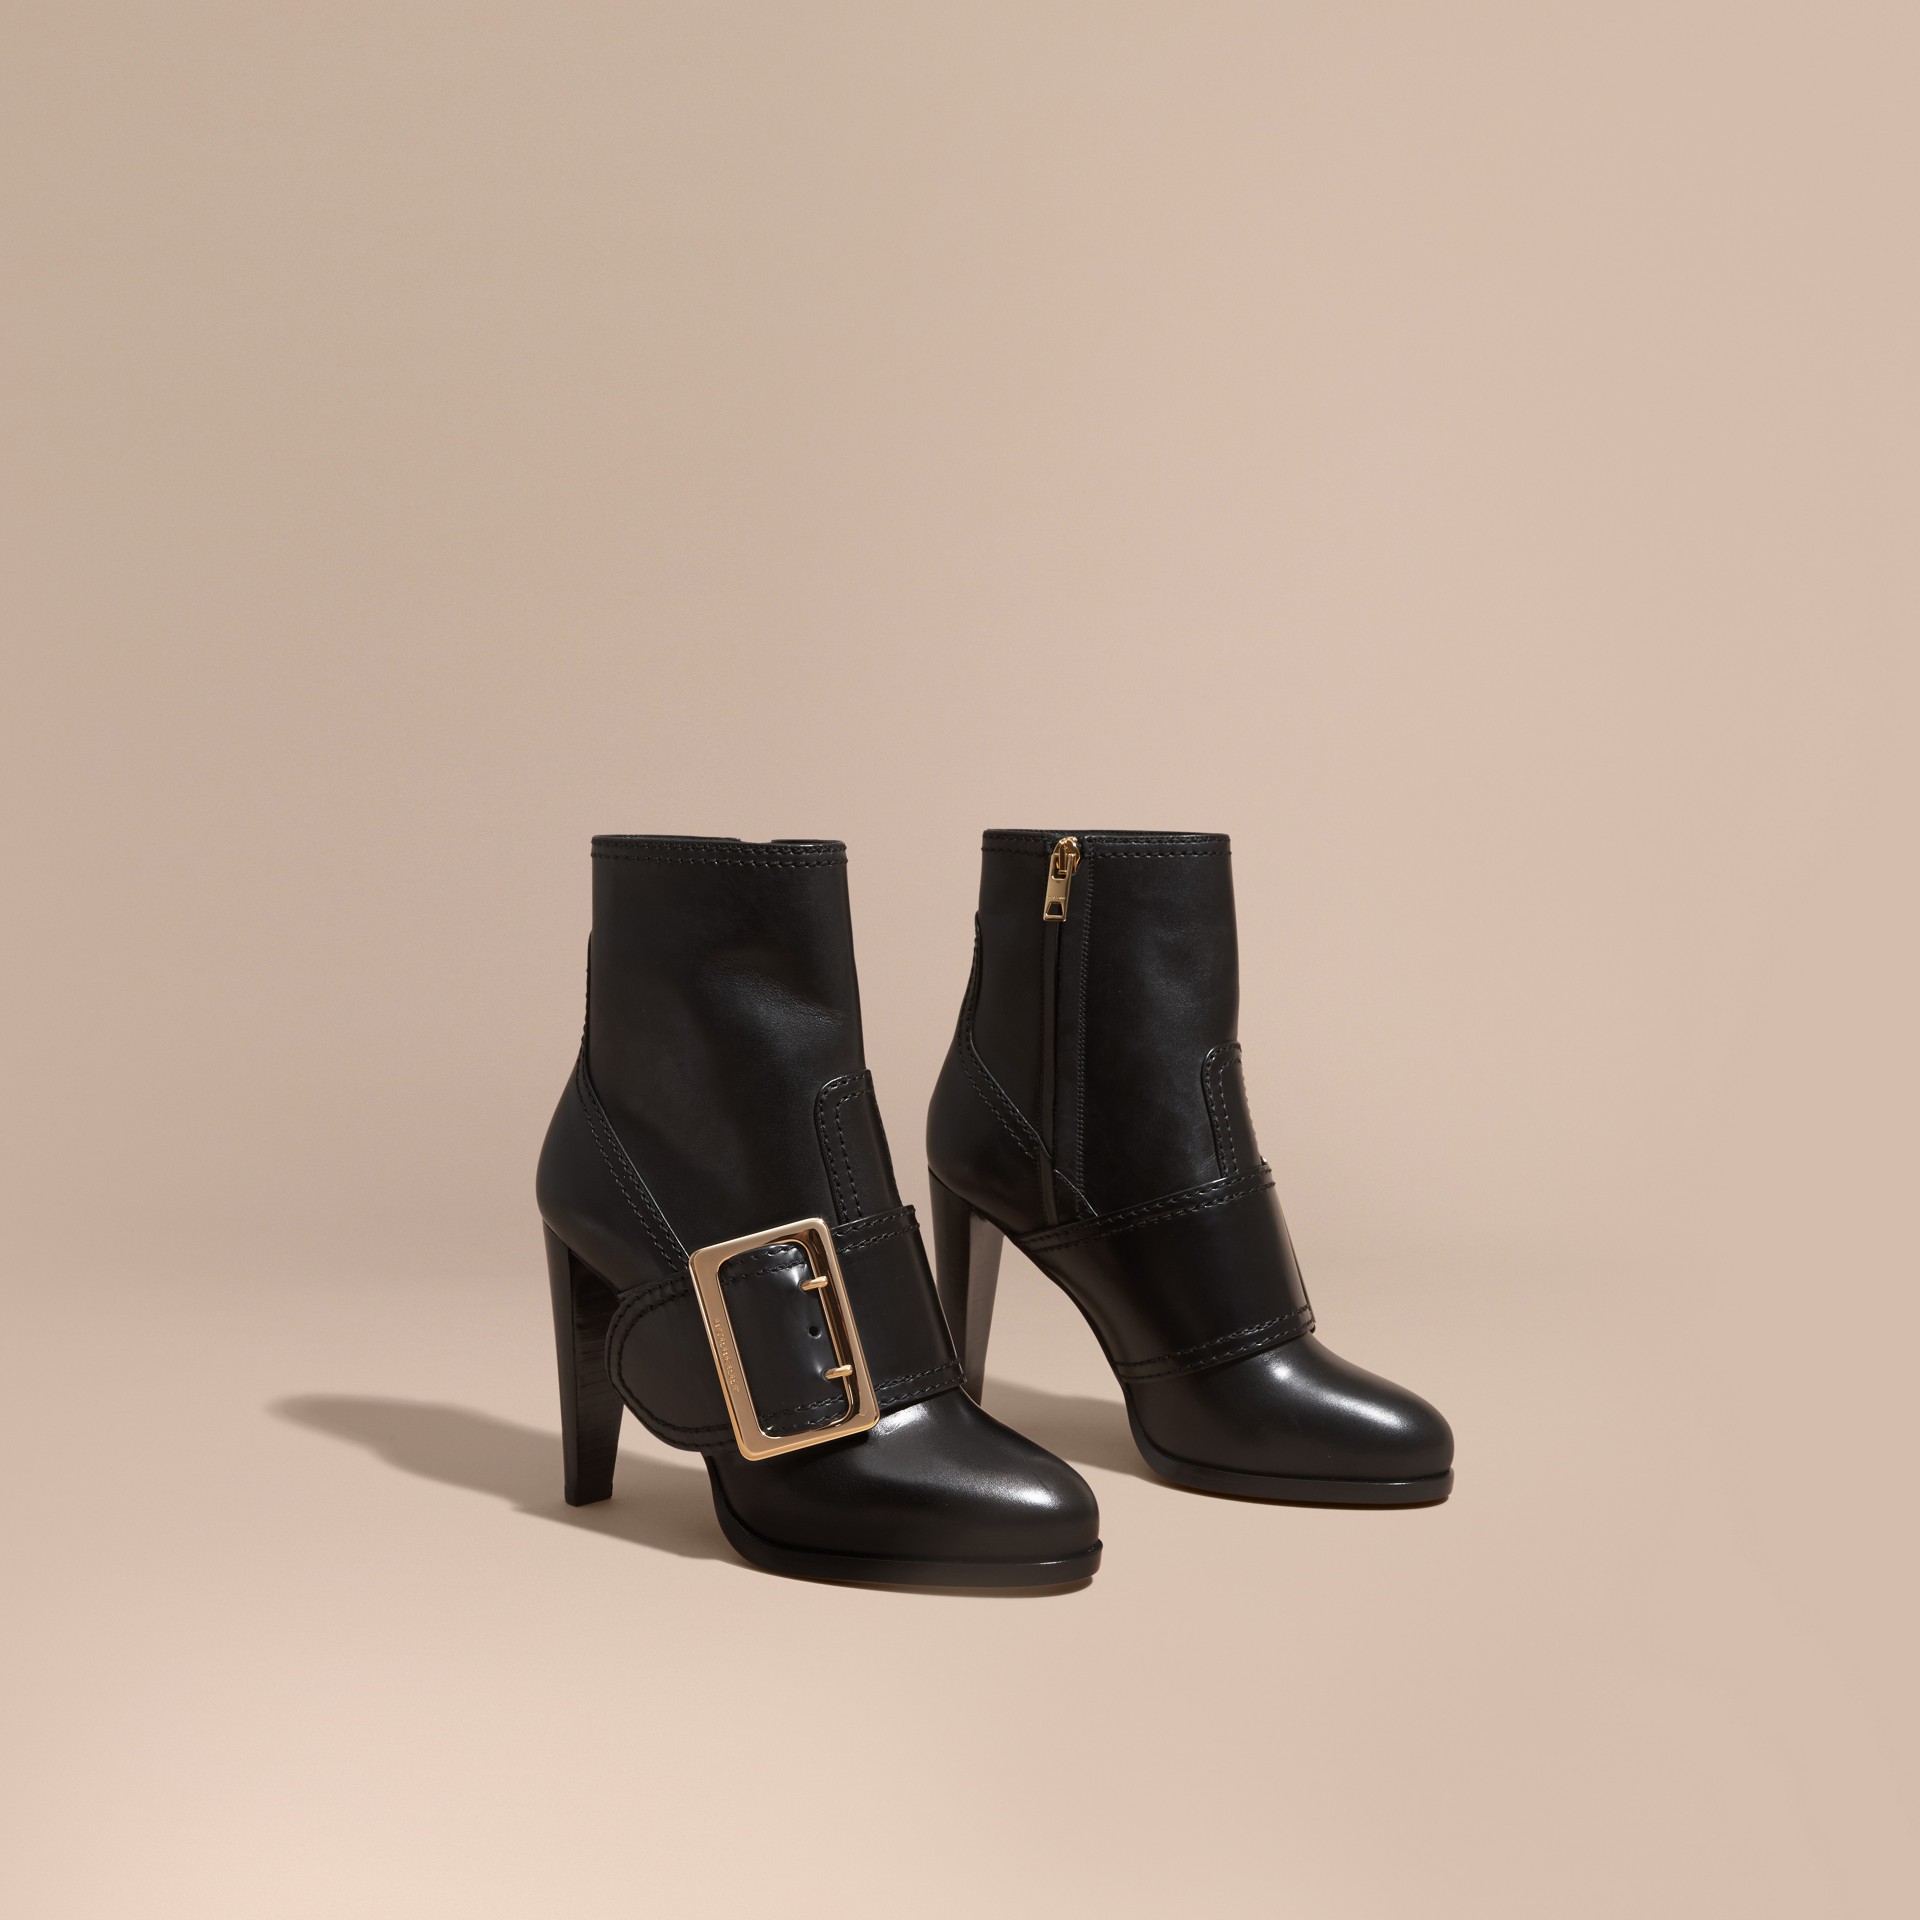 Buckle Detail Leather Platform Boots | Burberry